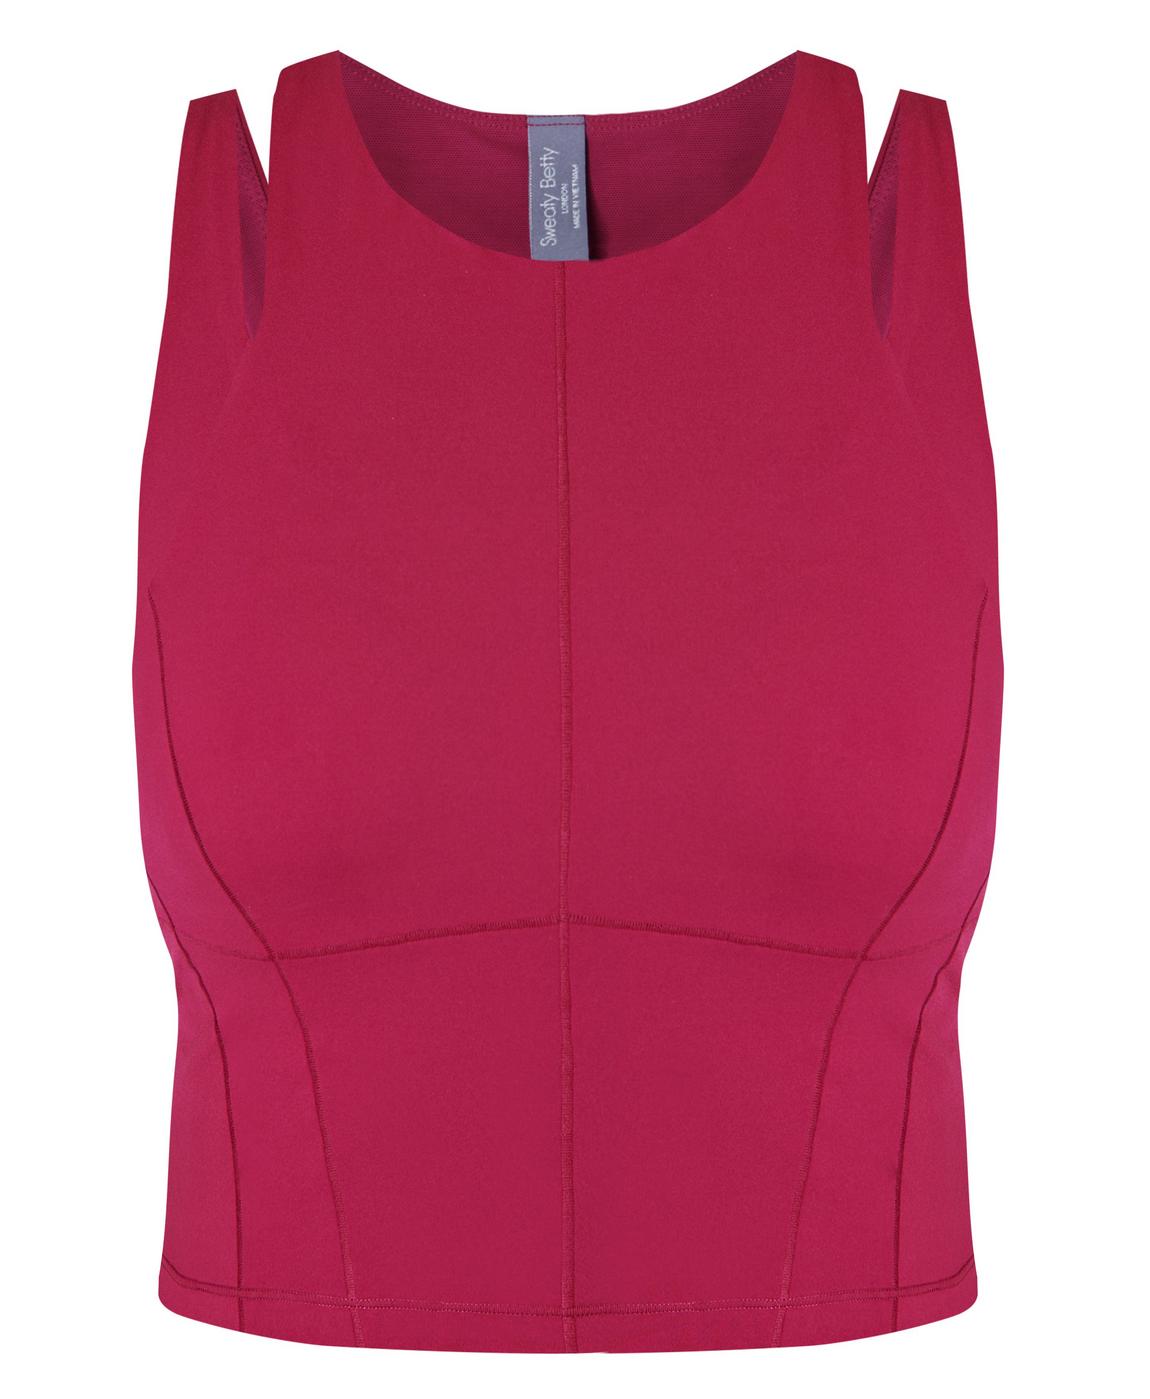 Power Contour Workout Tank Top - Vamp Red, Women's Vests